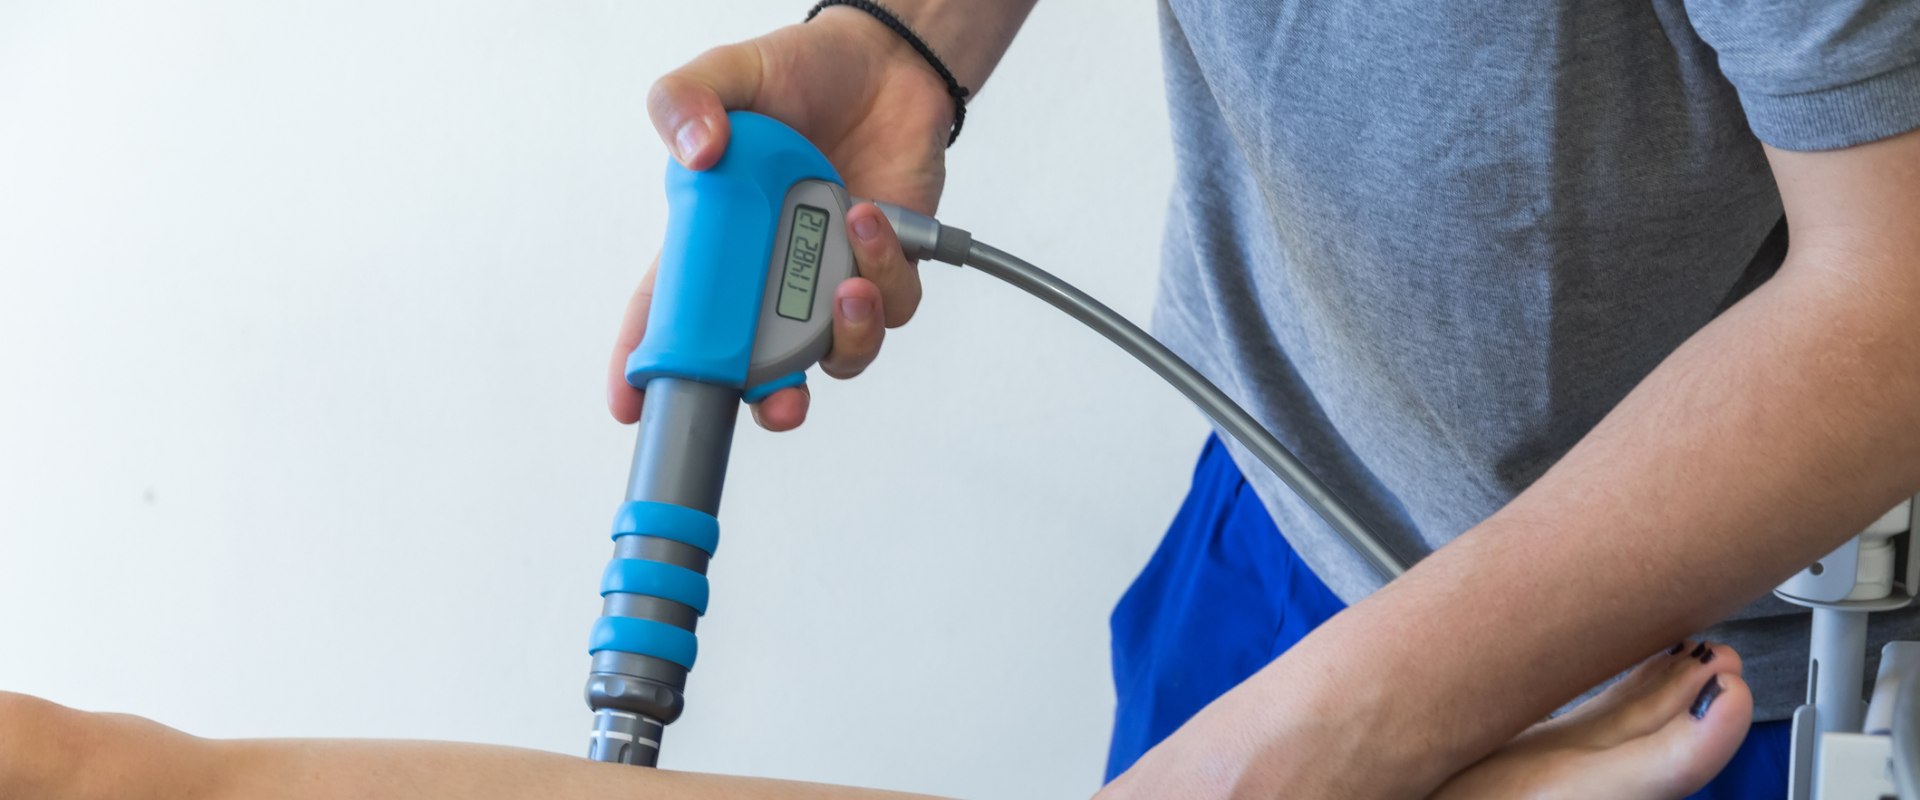 Why is shockwave therapy painful?